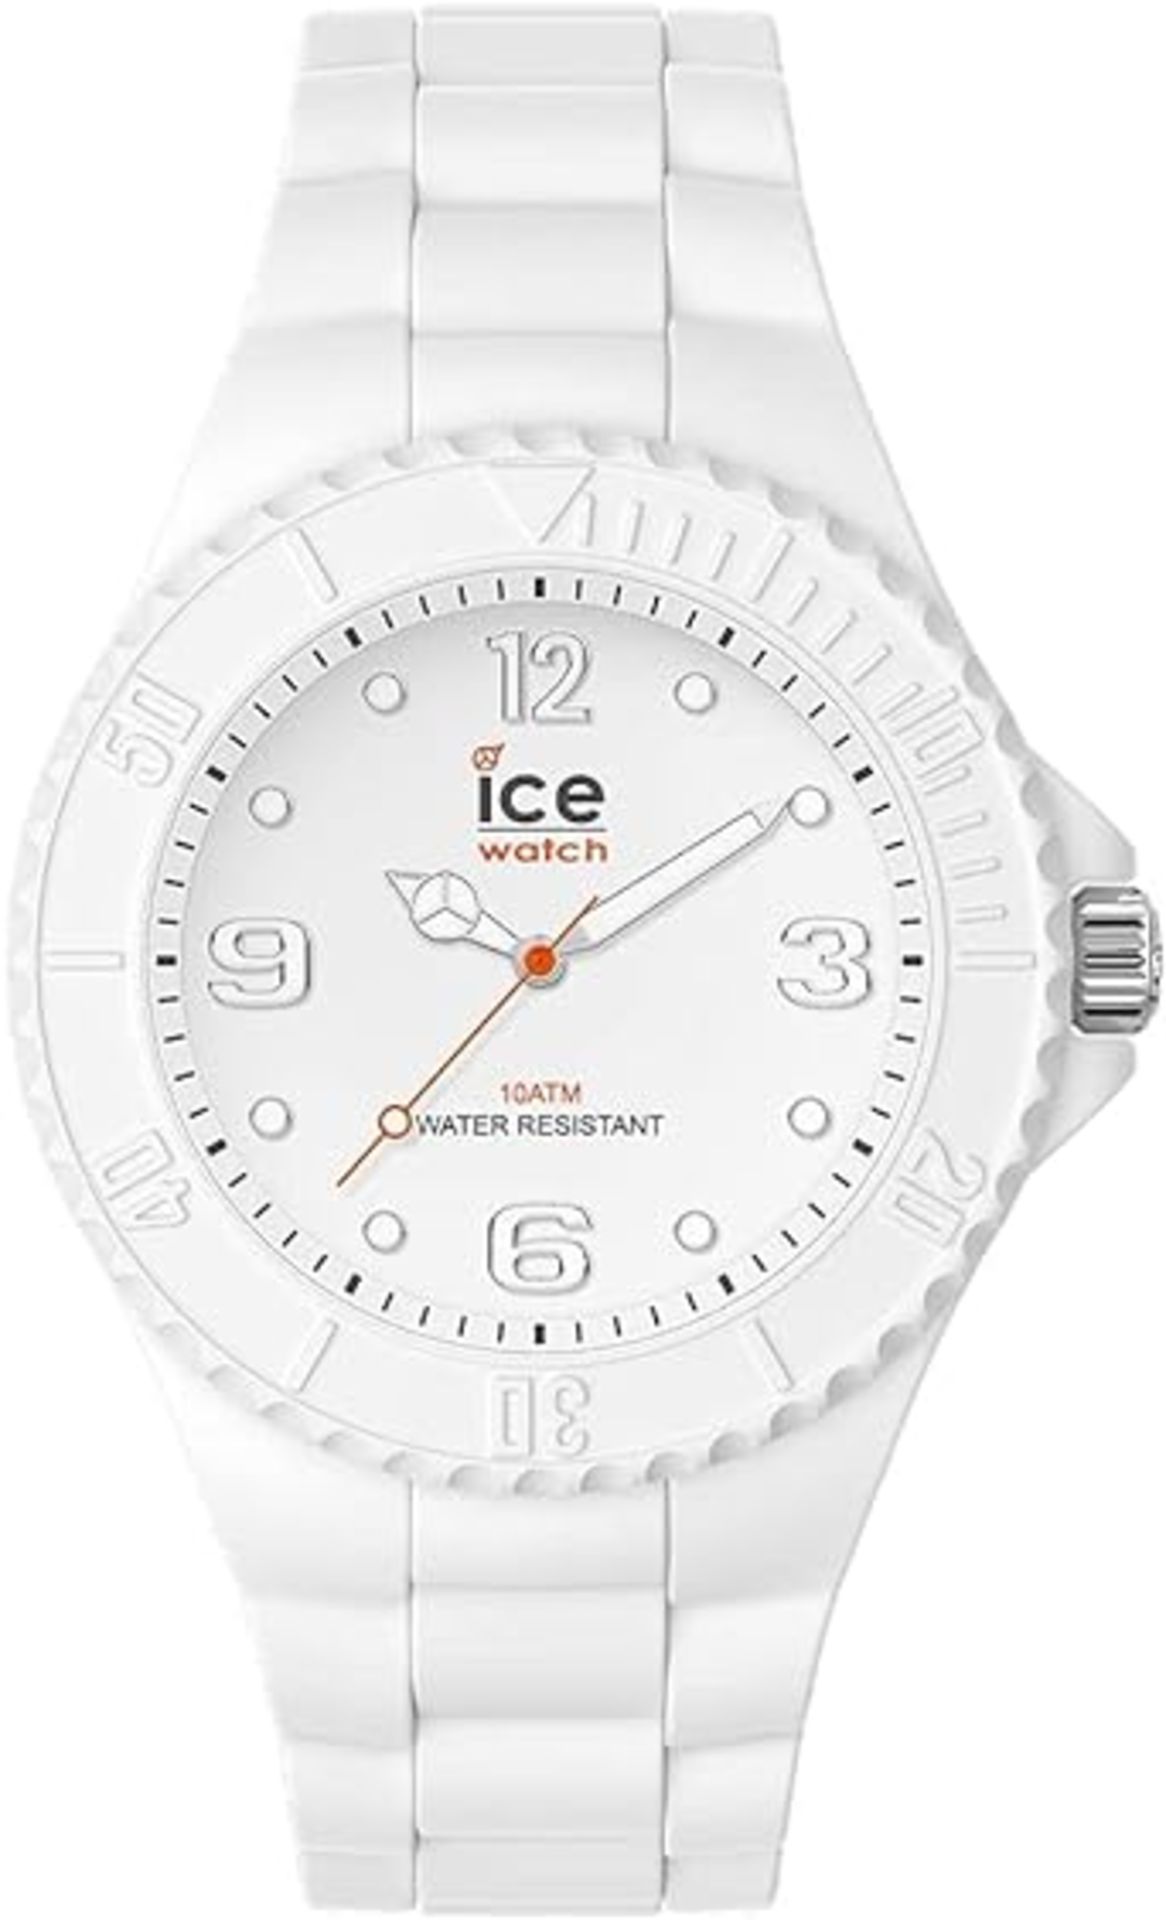 4x BRAND NEW ICE-WATCH Ice Generation Mens Watch. WHITE. RRP £75 EACH. (OFC151). Medium (40 mm)